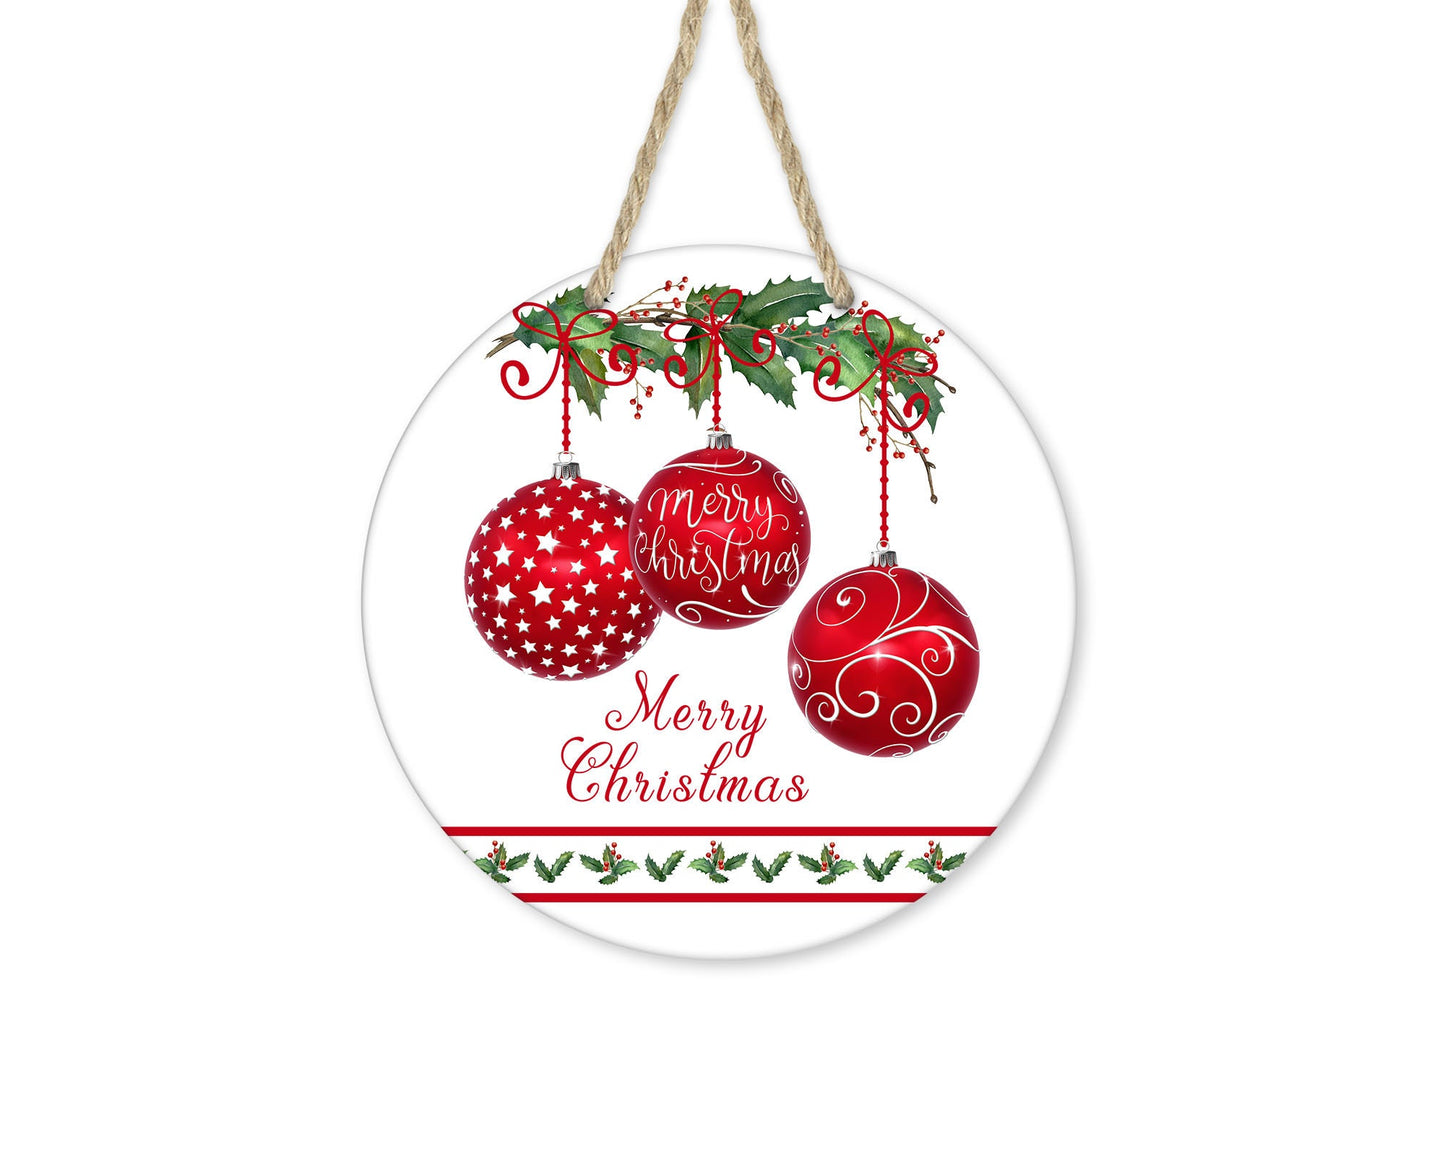 Red Ornaments Merry Christmas Round Printed Handmade Wood Sign (8" or 12")